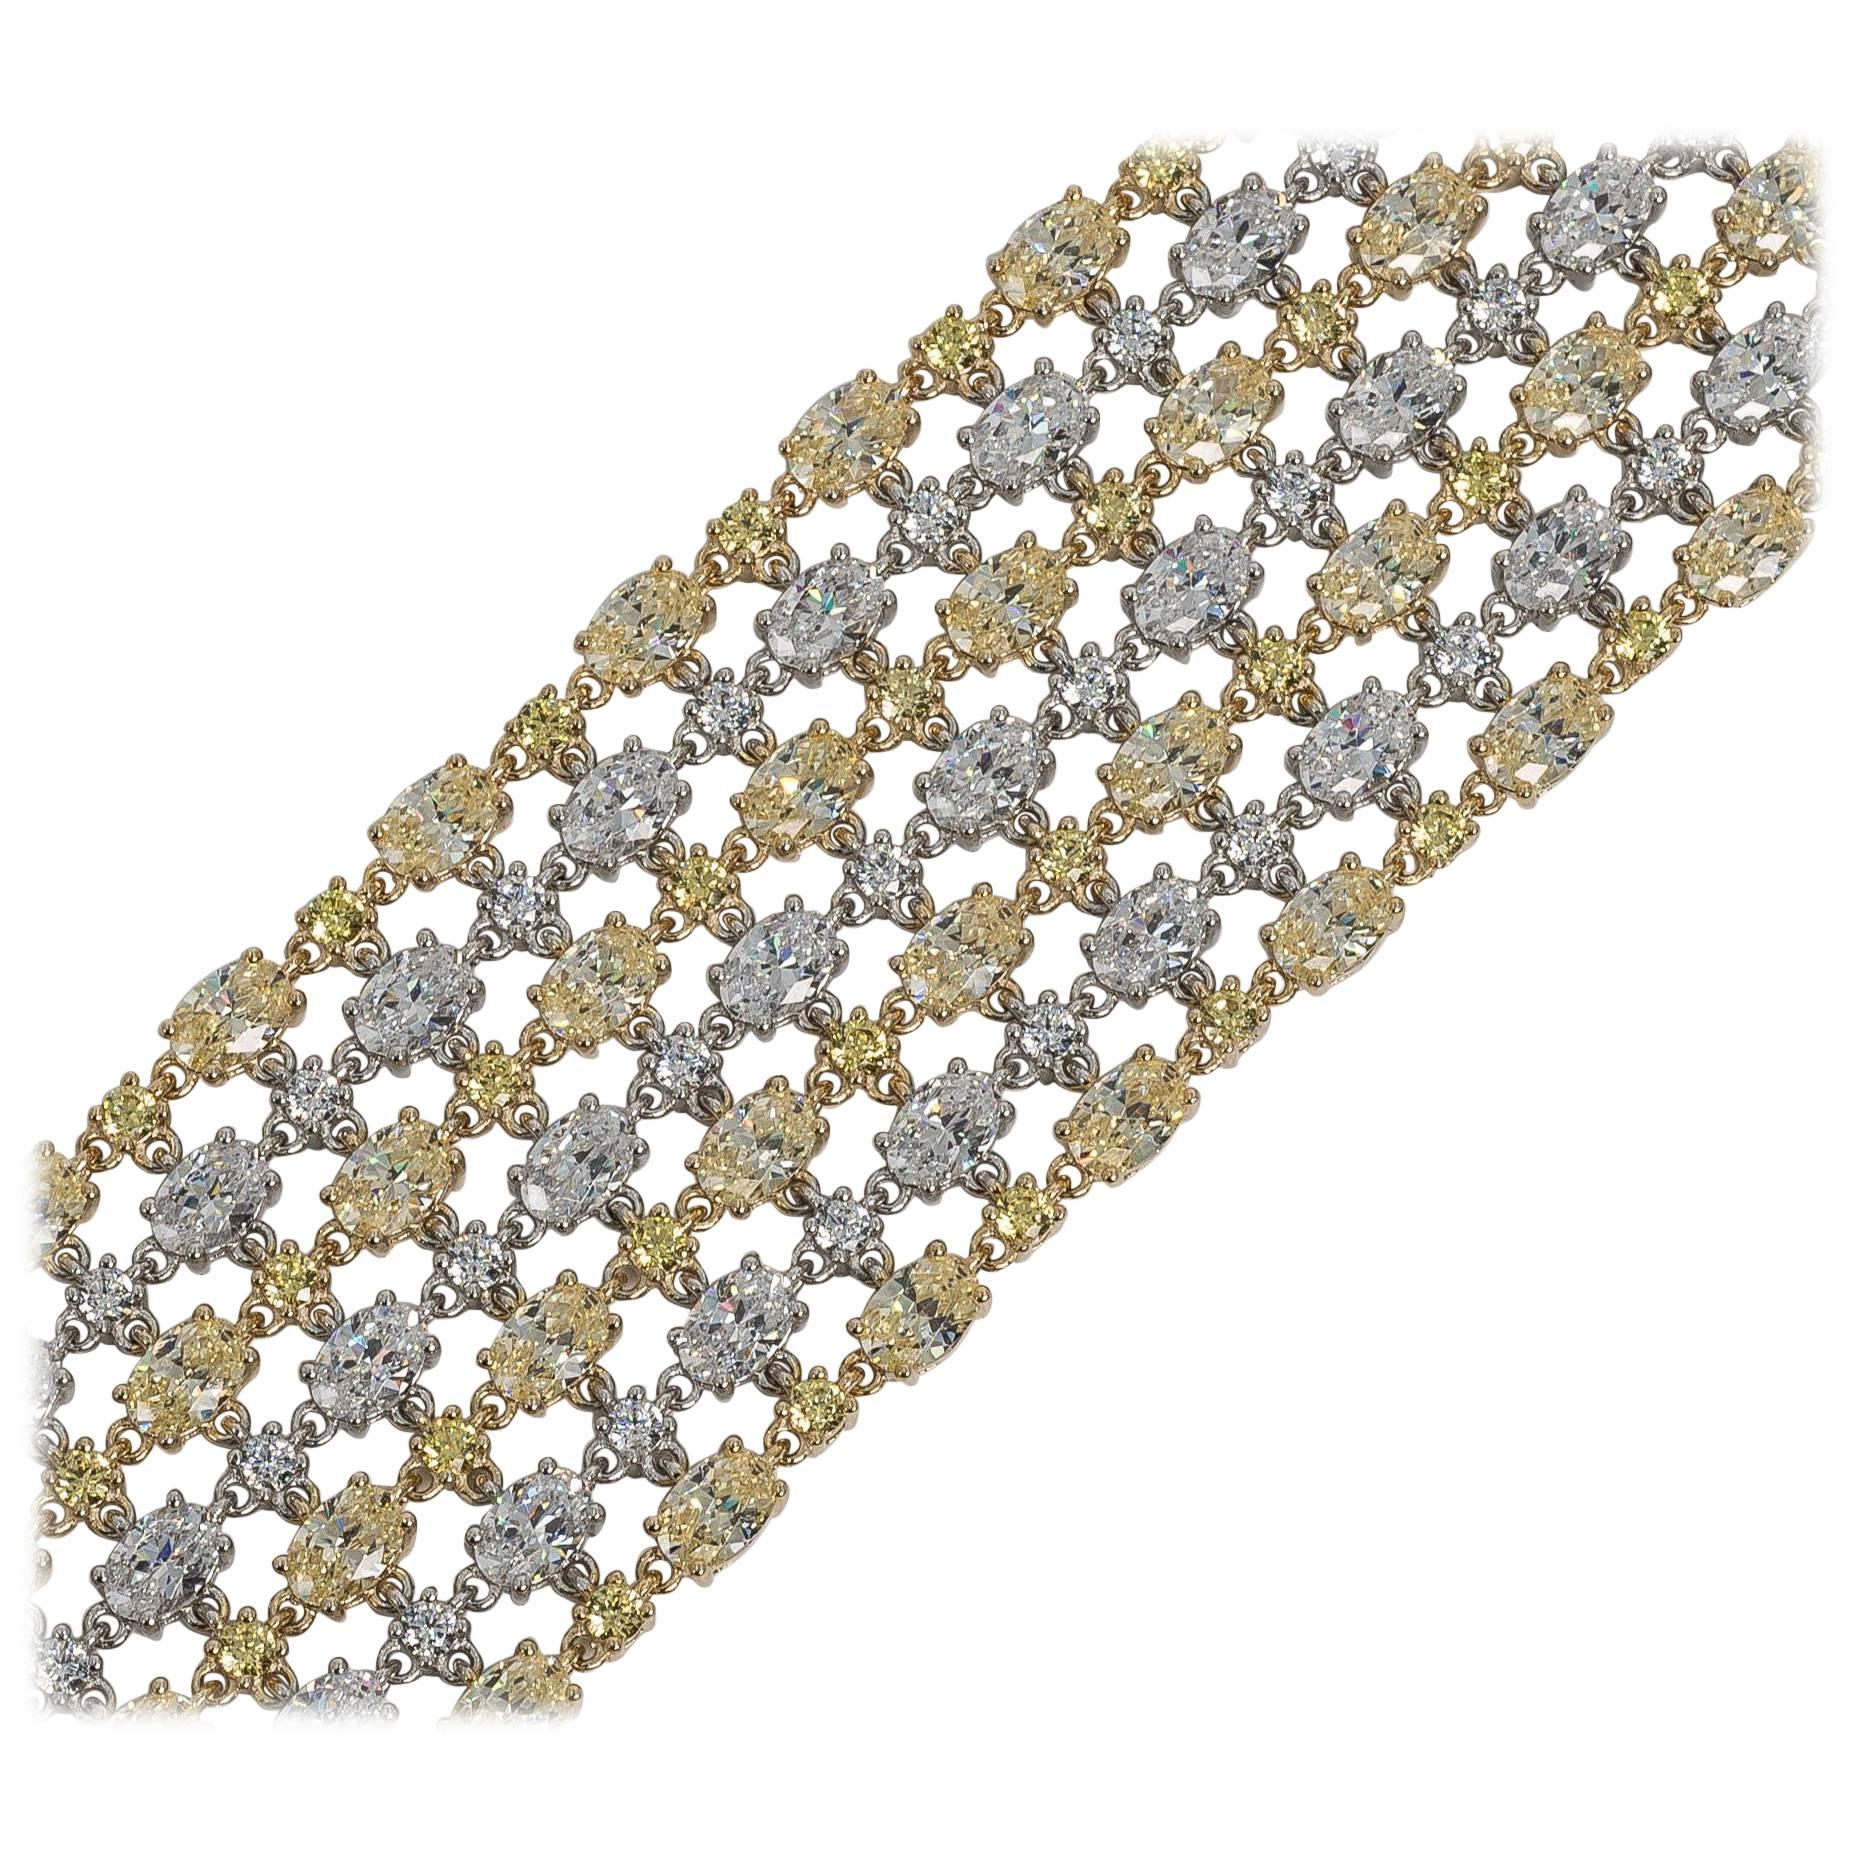 White and yellow cubic zirconia mesh costume jewelry bracelet made of hand-cut canary yellow and white rhodium sterling set oval and round cubic zirconia. Amazing fine quality guaranteed to look like the real. Seven and half inches long by one and a